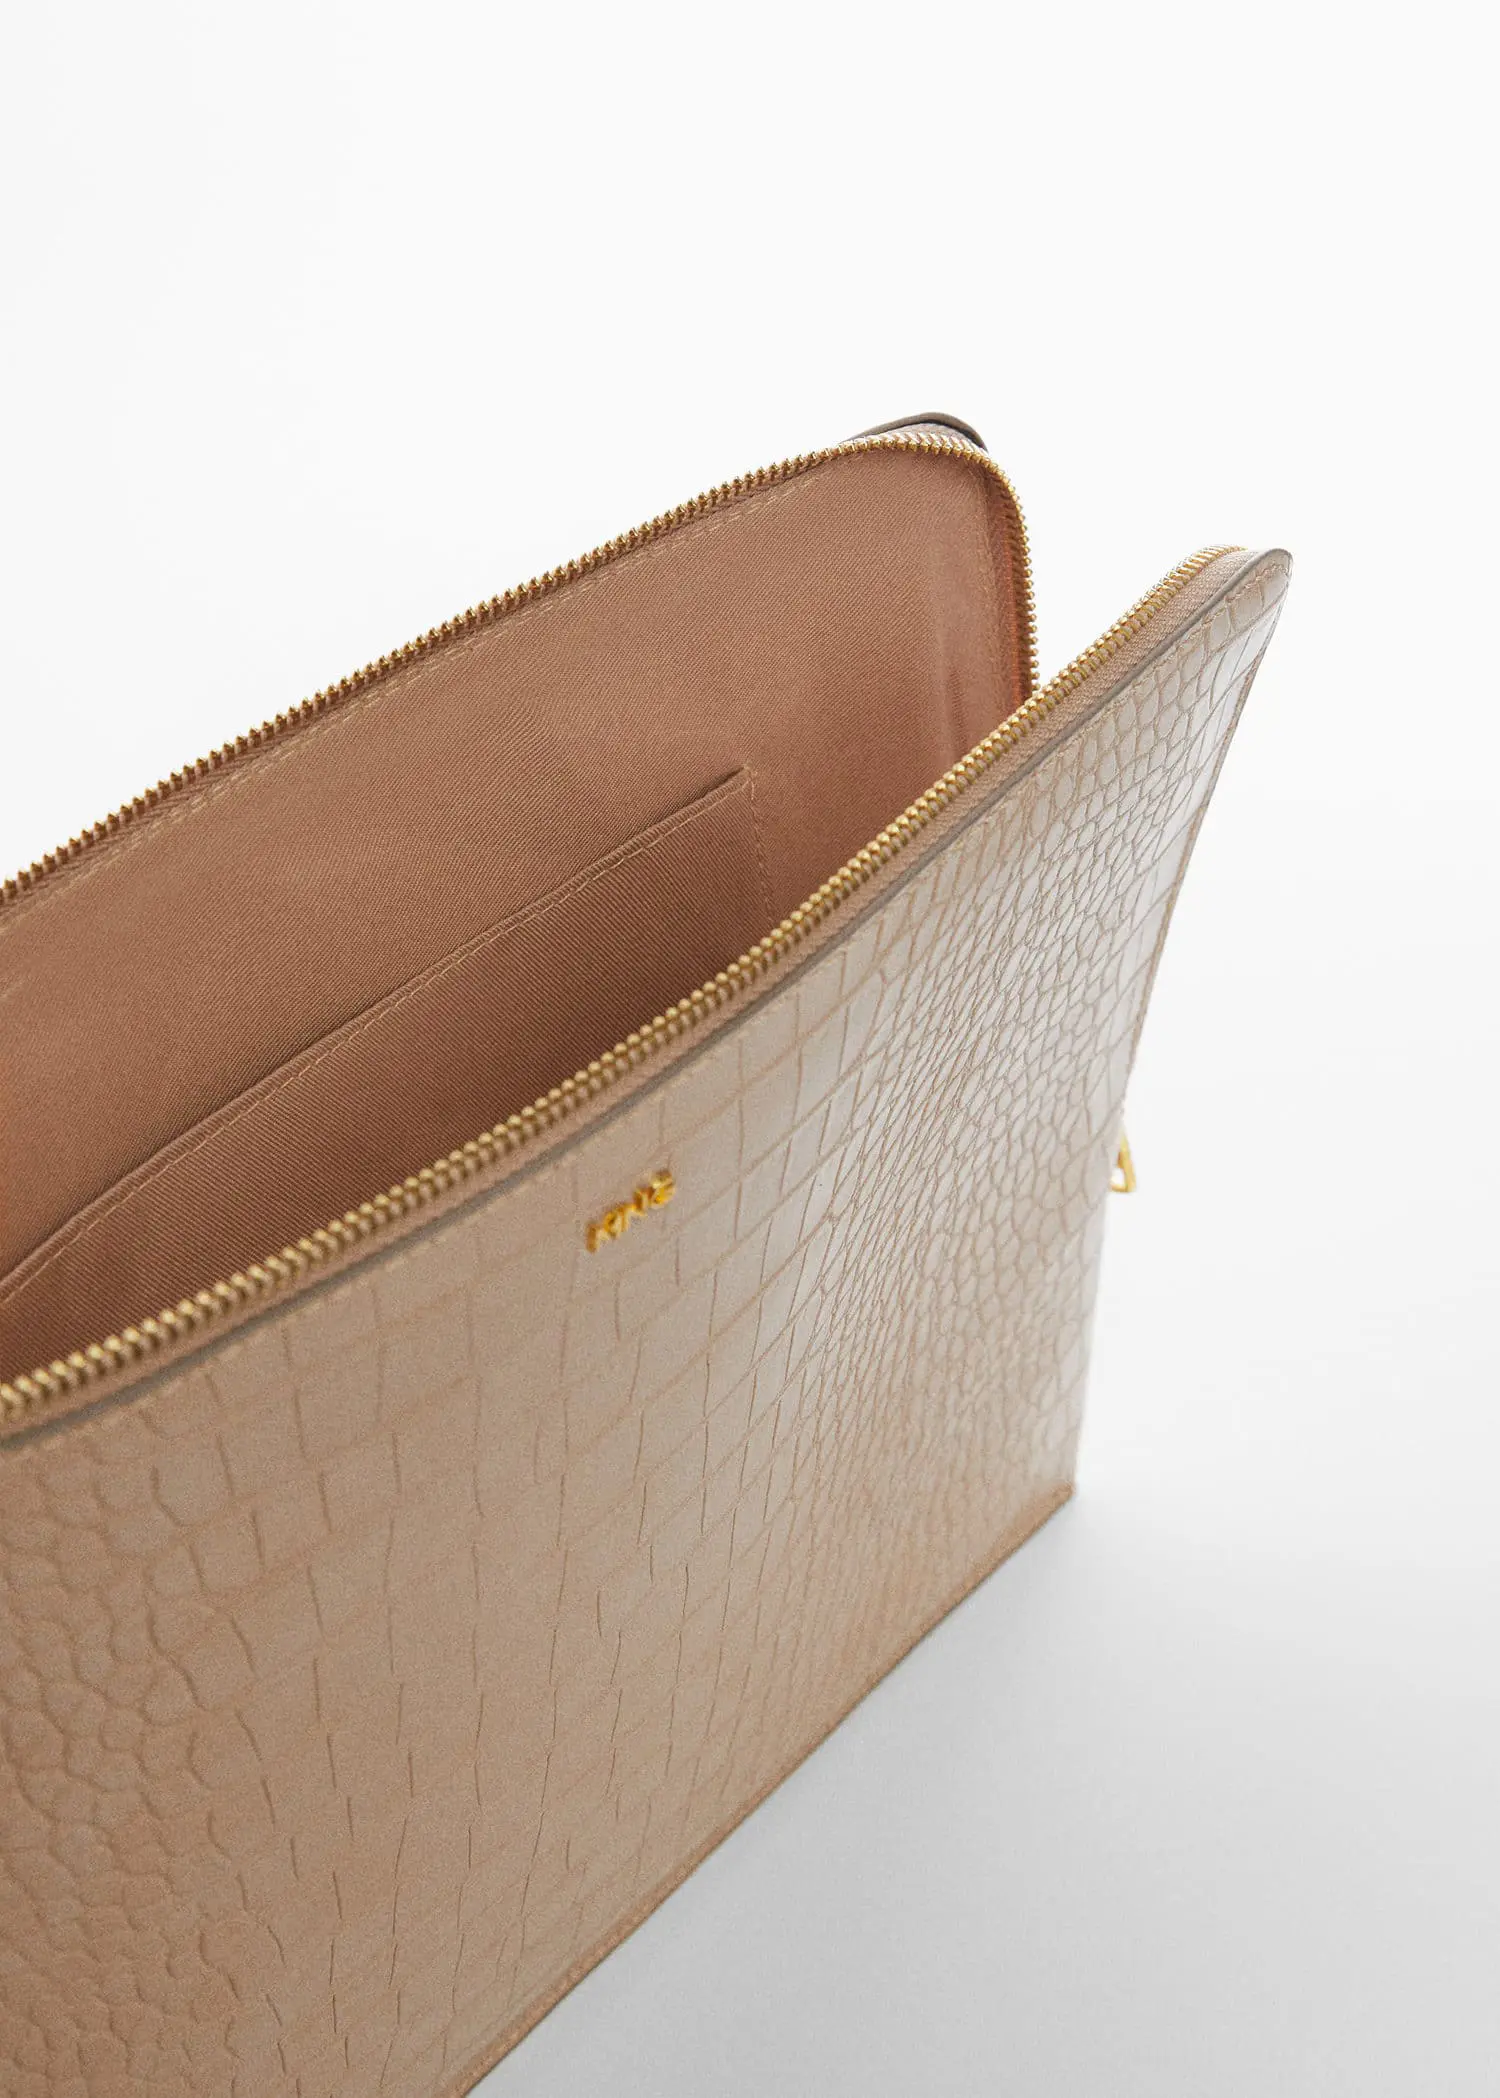 Mango Coco laptop case. a close-up view of the inside of a bag. 